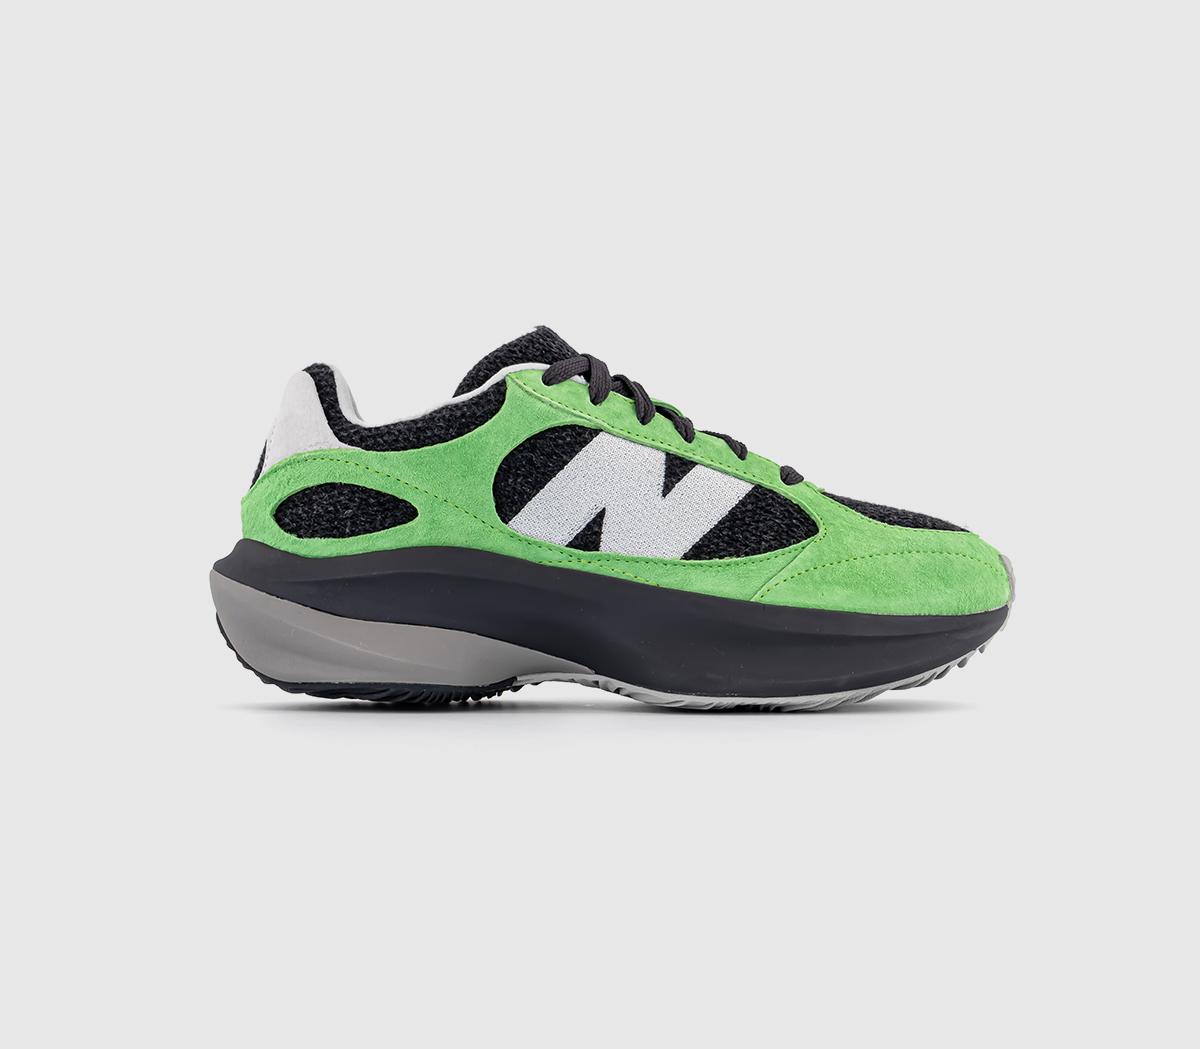 New Balance Kids Wrpd Runner Trainers Lime Green, 4